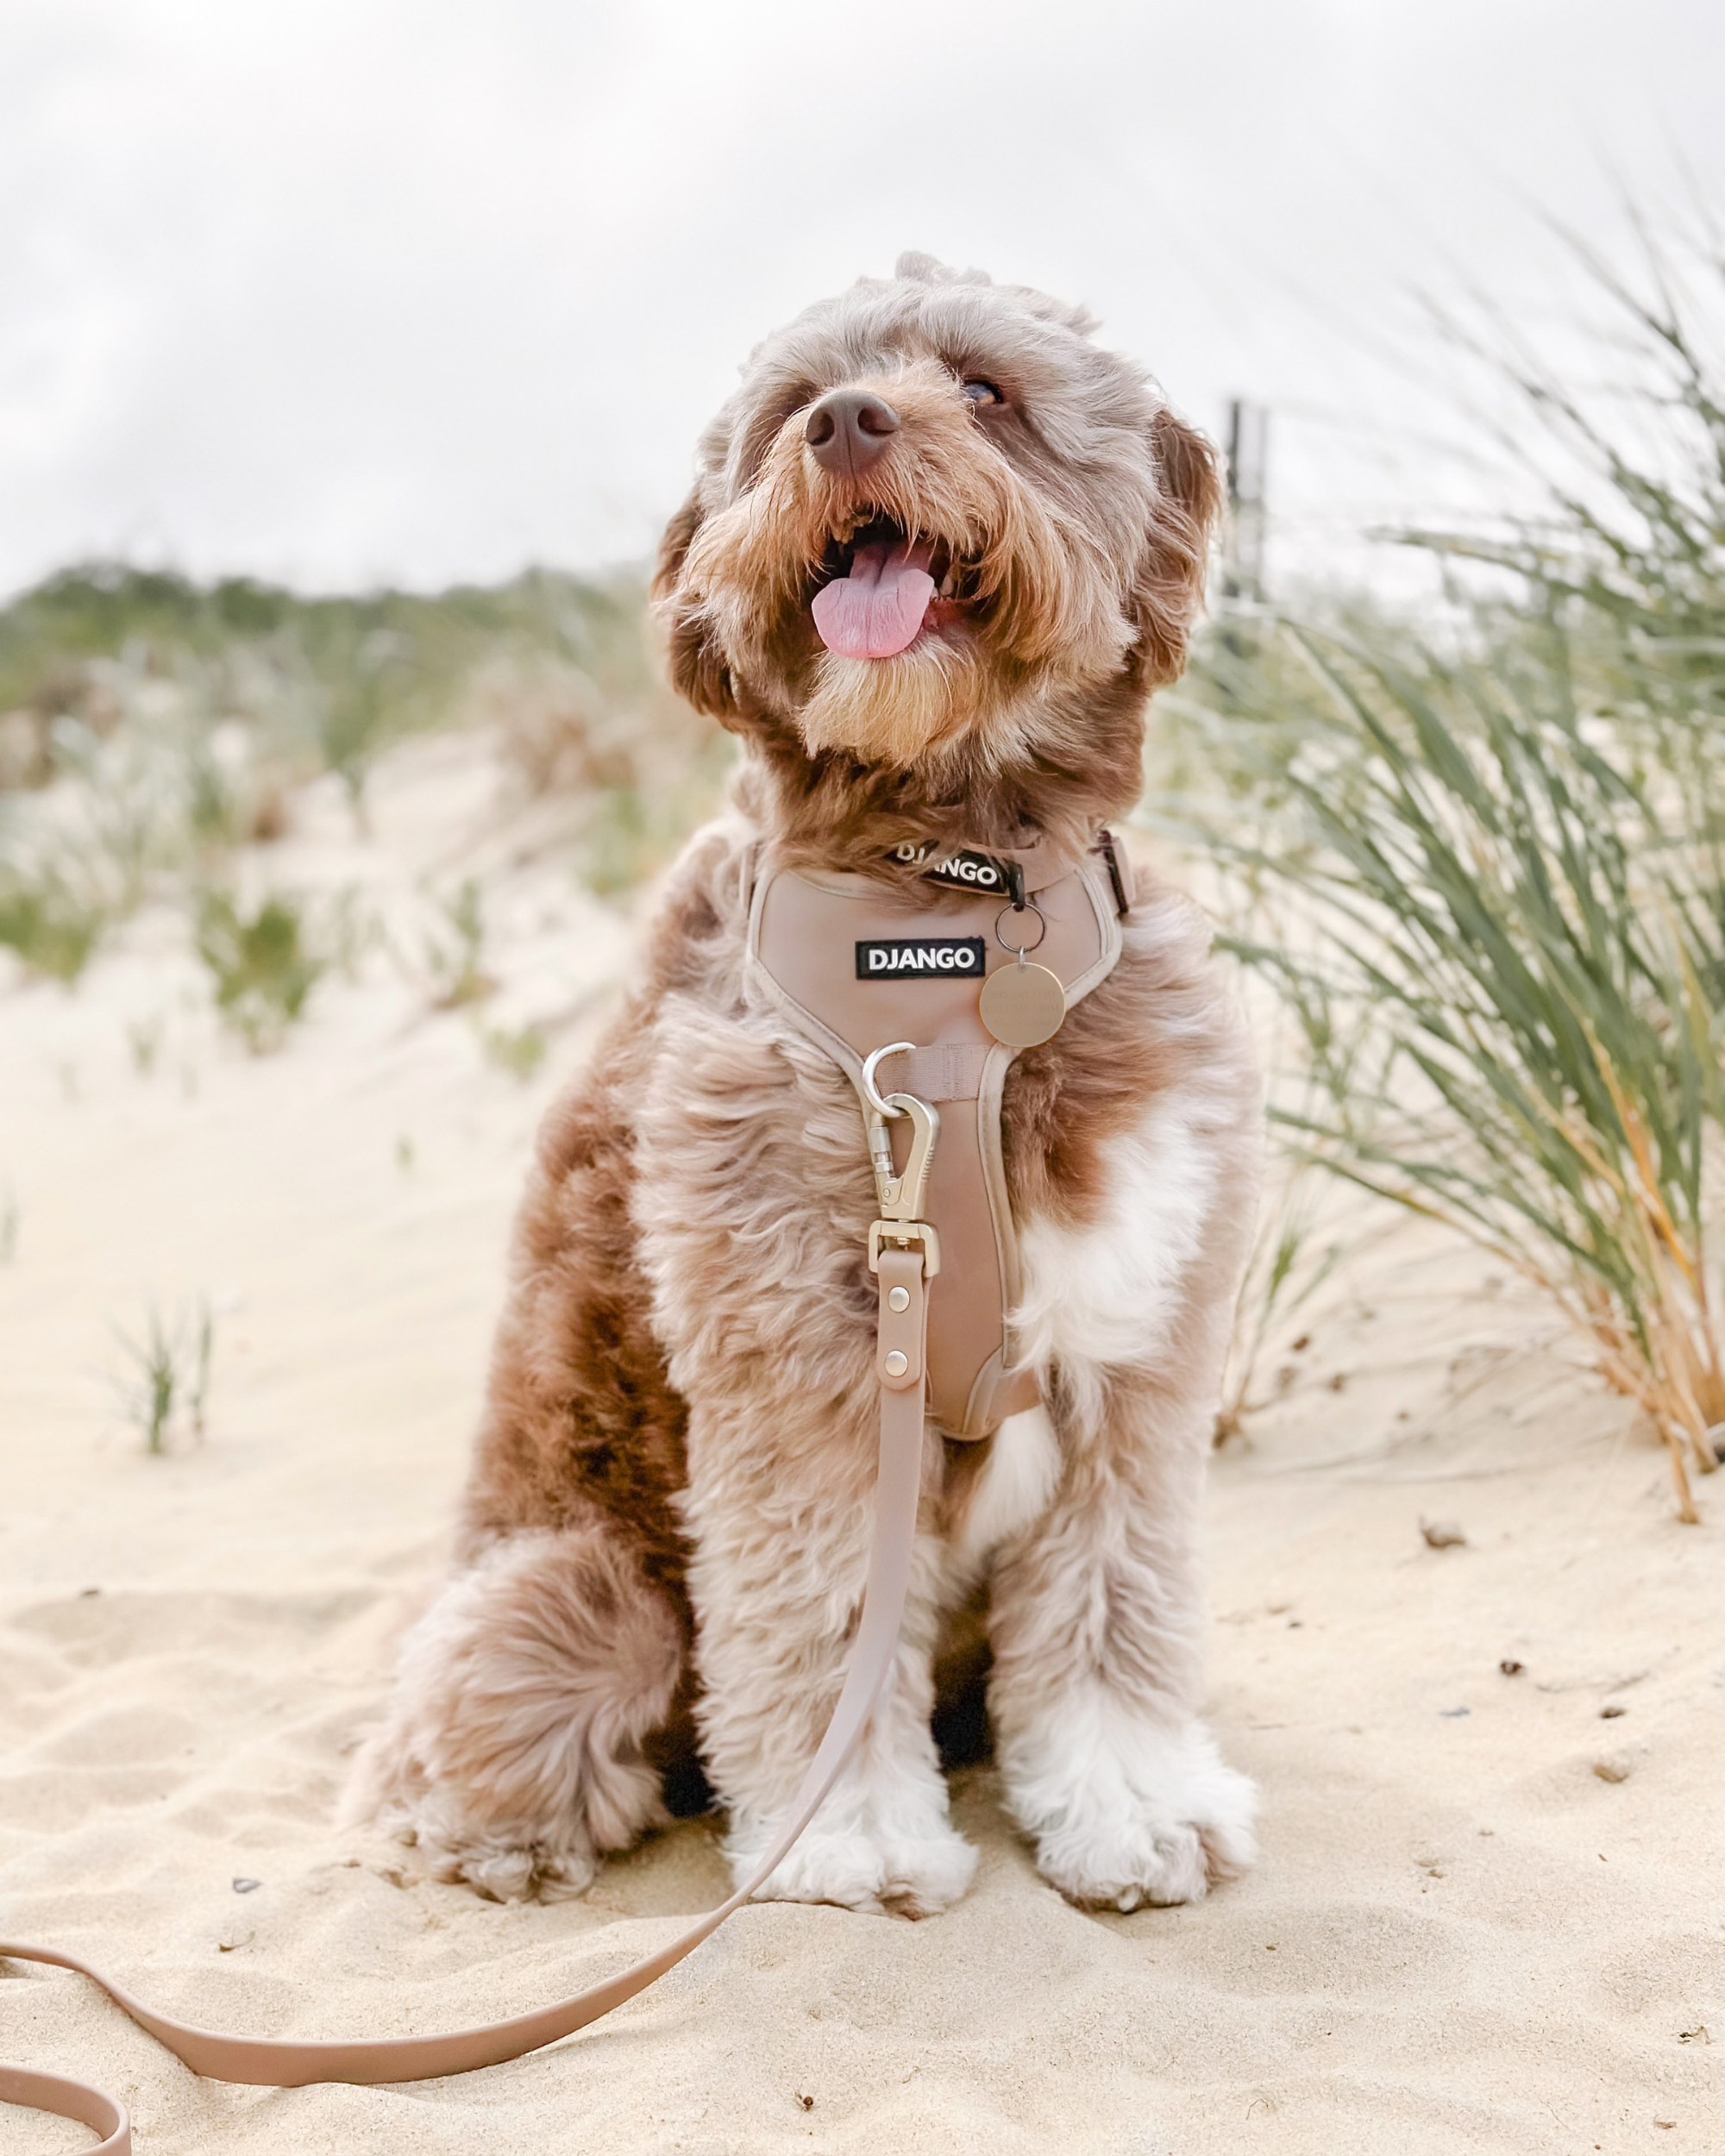 DJANGO Tahoe No Pull Dog Harness in Sandy Beige - Key features include a weather-resistant and padded neoprene exterior, a narrow and deep harness body (to prevent the risk of chafing) reflective piping, and soft webbing. Ausssiedoodle Harley wears a size large DJANGO harness and uses the standard sized DJANGO Tahoe Waterproof Dog Leash. - djangobrand.large